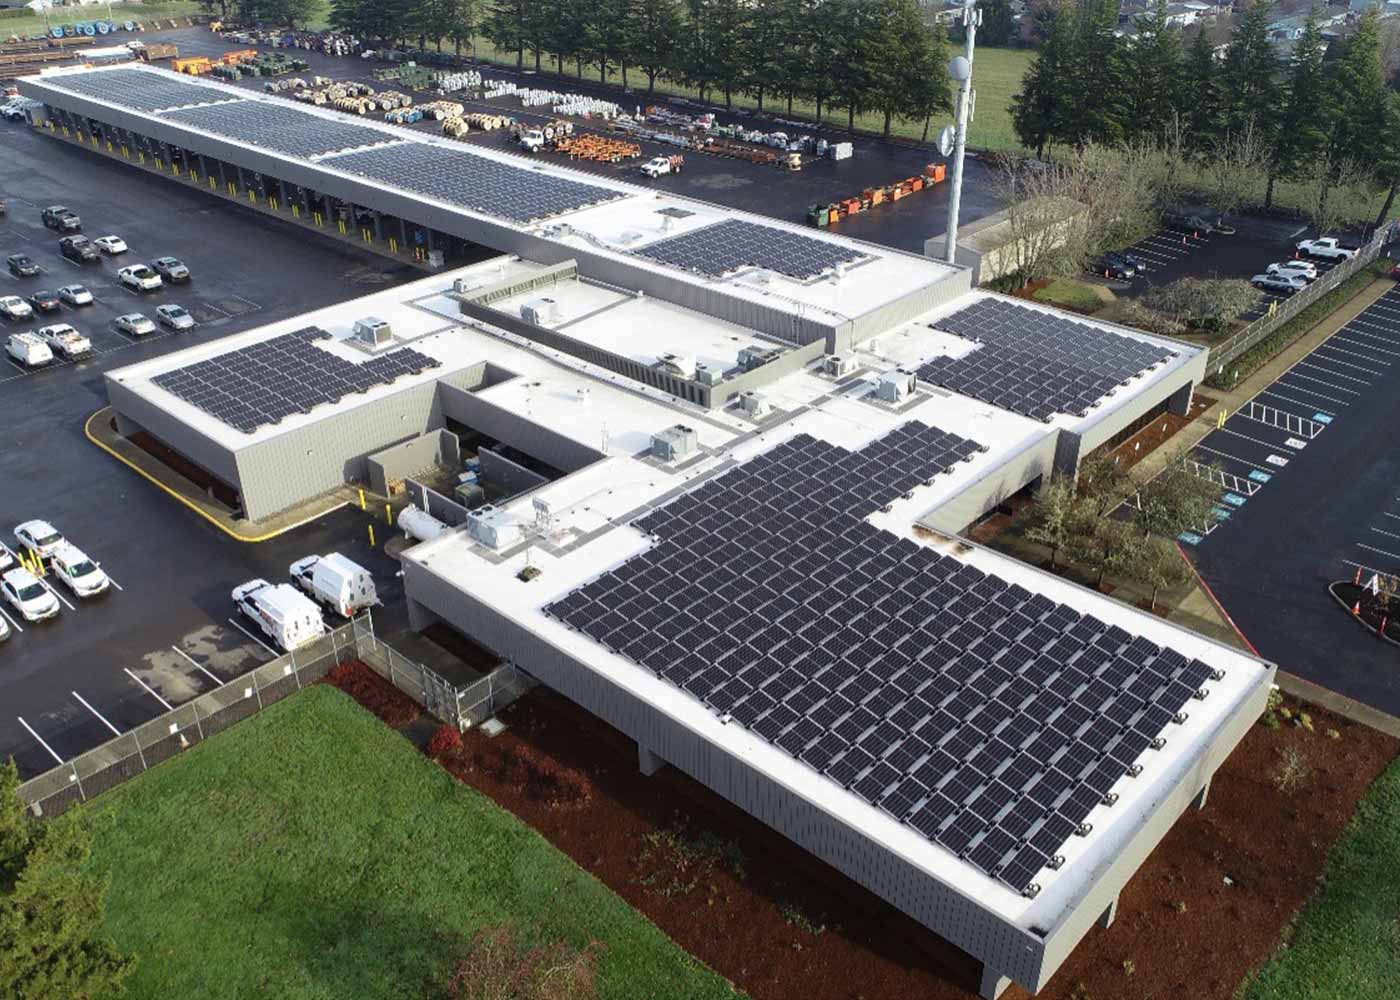 Salem Operations Center: The 420kW system is PGE’s largest solar installation to date and is expected to become fully operational soon. Once online, the solar array is estimated to offset about 80% of the facility’s total power needs. 